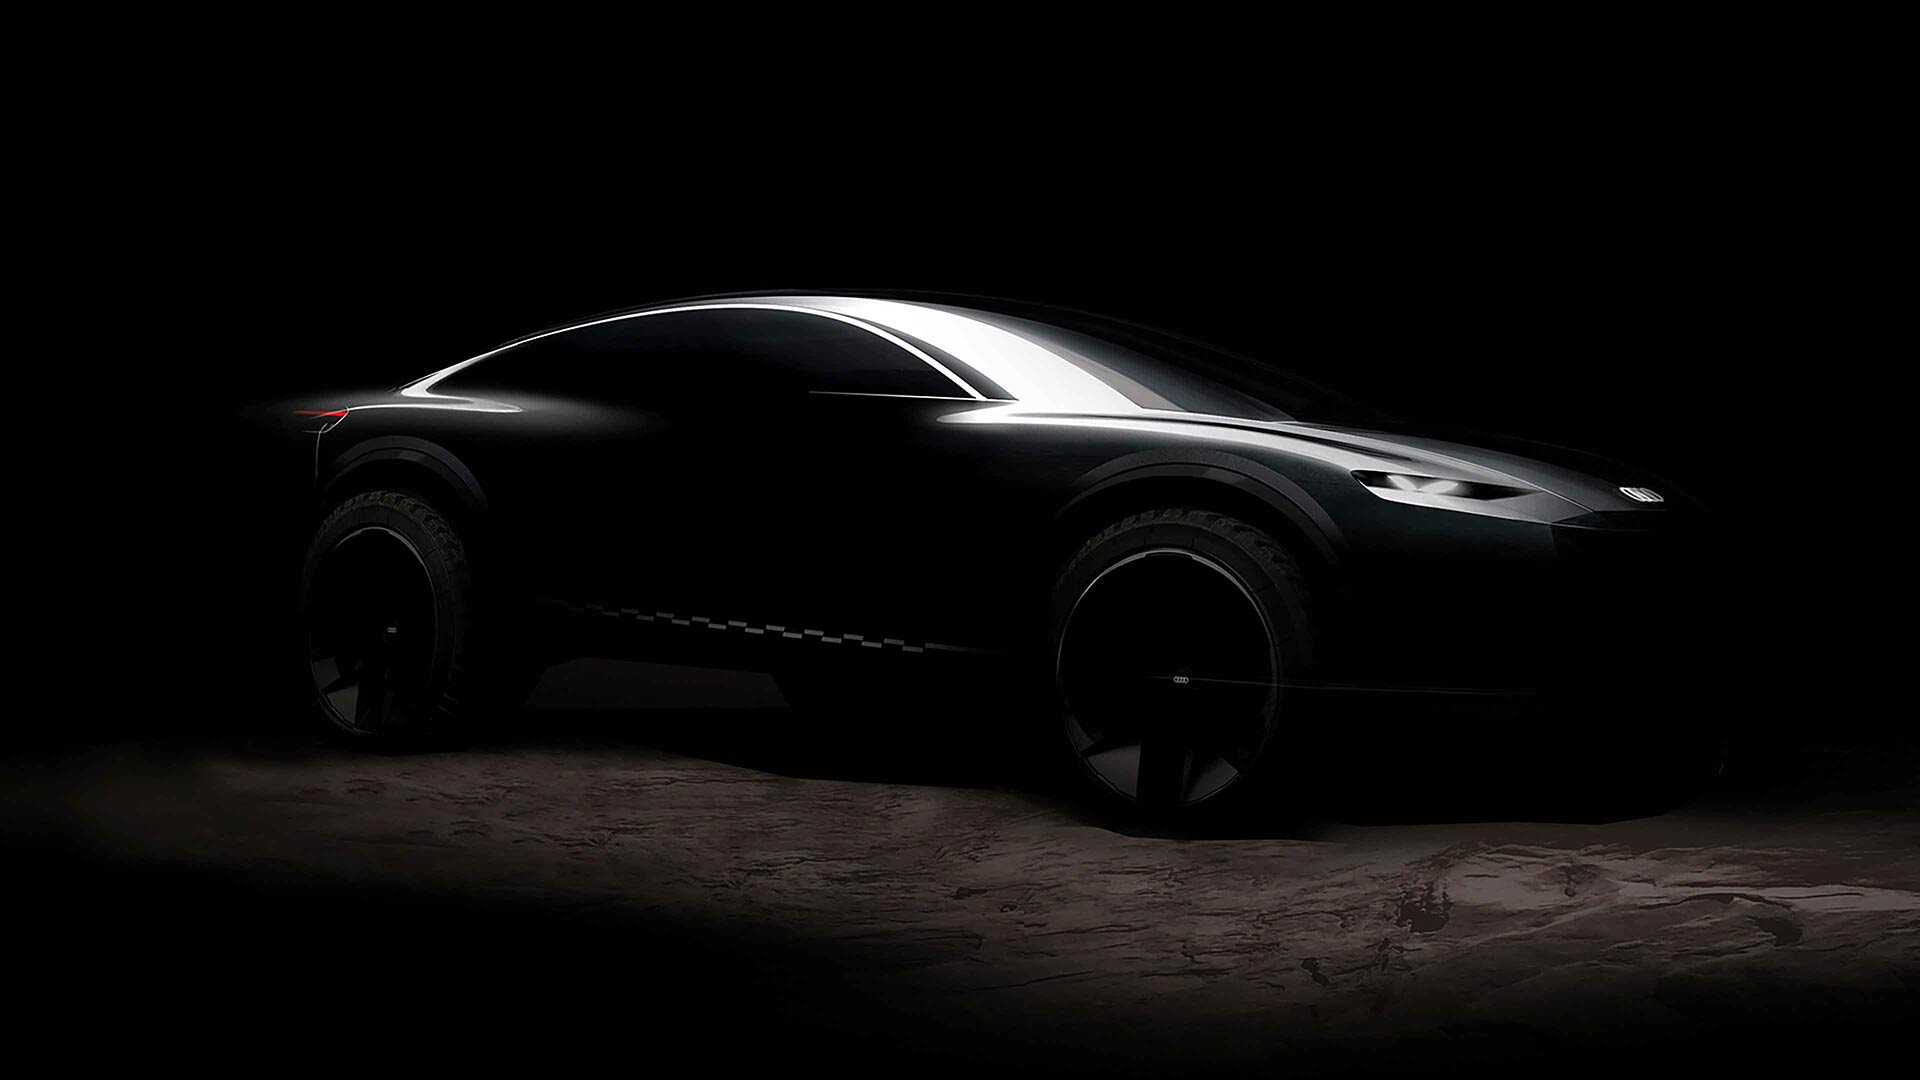 The next chapter: Audi activesphere concept